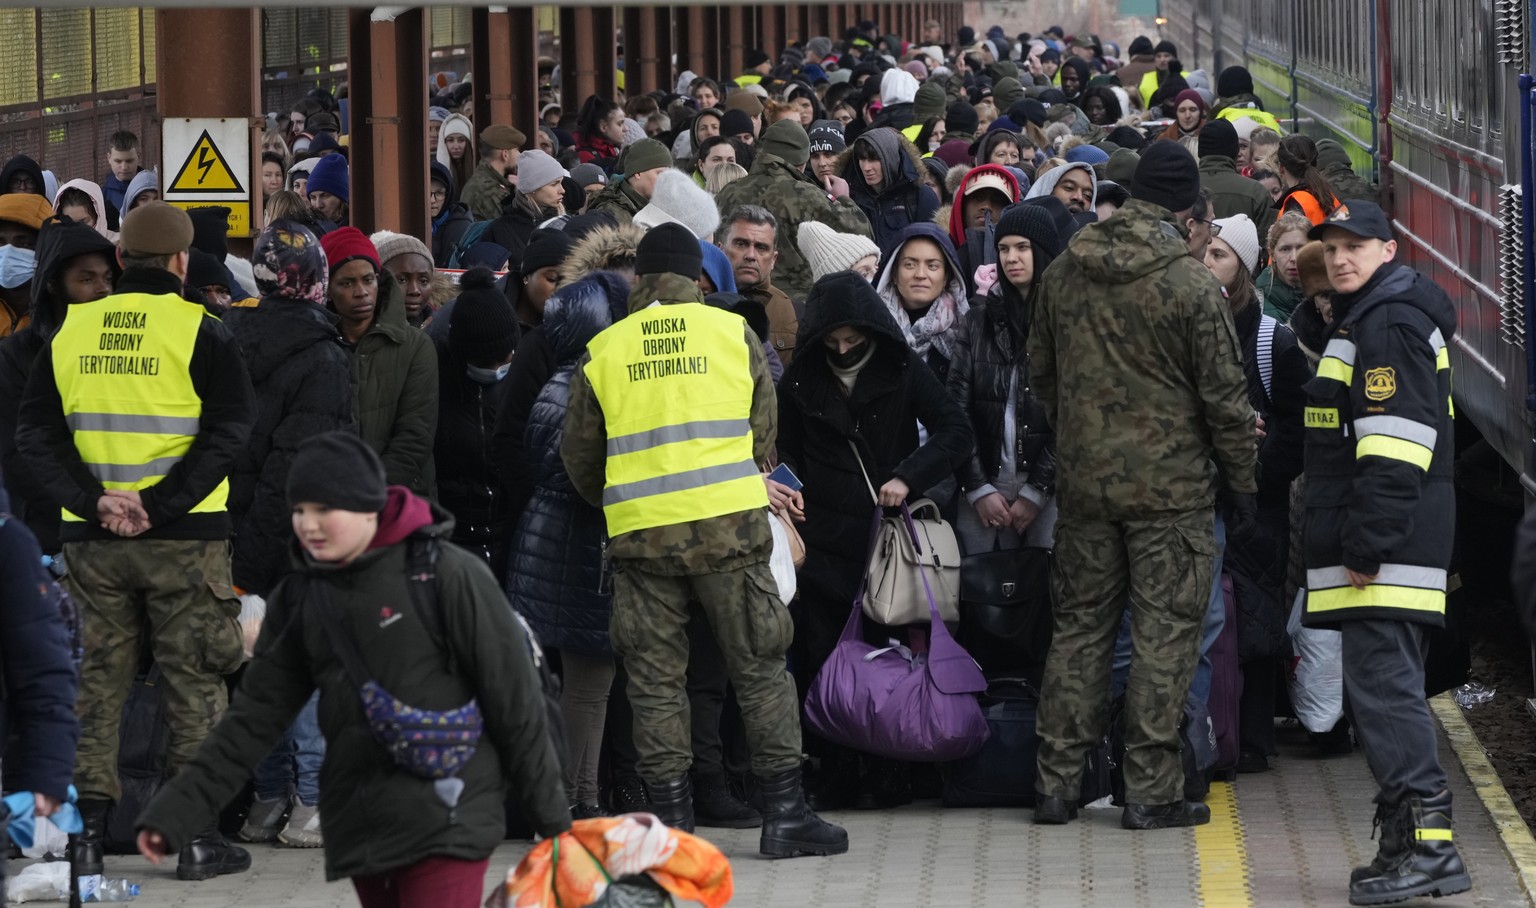 FILE - Refugees from Ukraine arrive at the railway station in Przemysl, Poland, Feb. 27, 2022. Nearly a year has passed since the Feb. 24, 2022, invasion sent millions of people fleeing across Ukraine ...